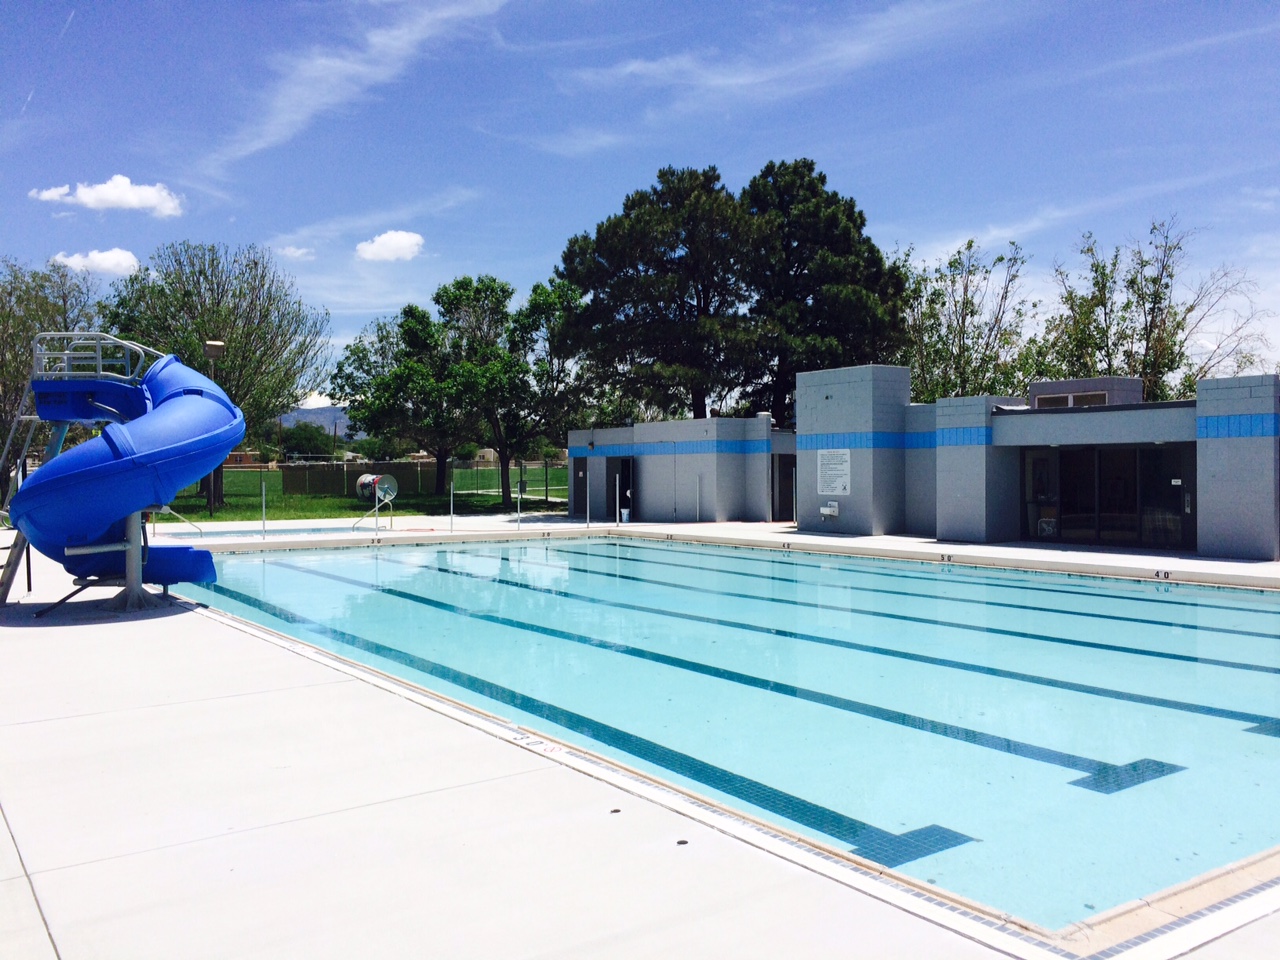 A photo of an outdoor swimming pool on bright, sunny day.